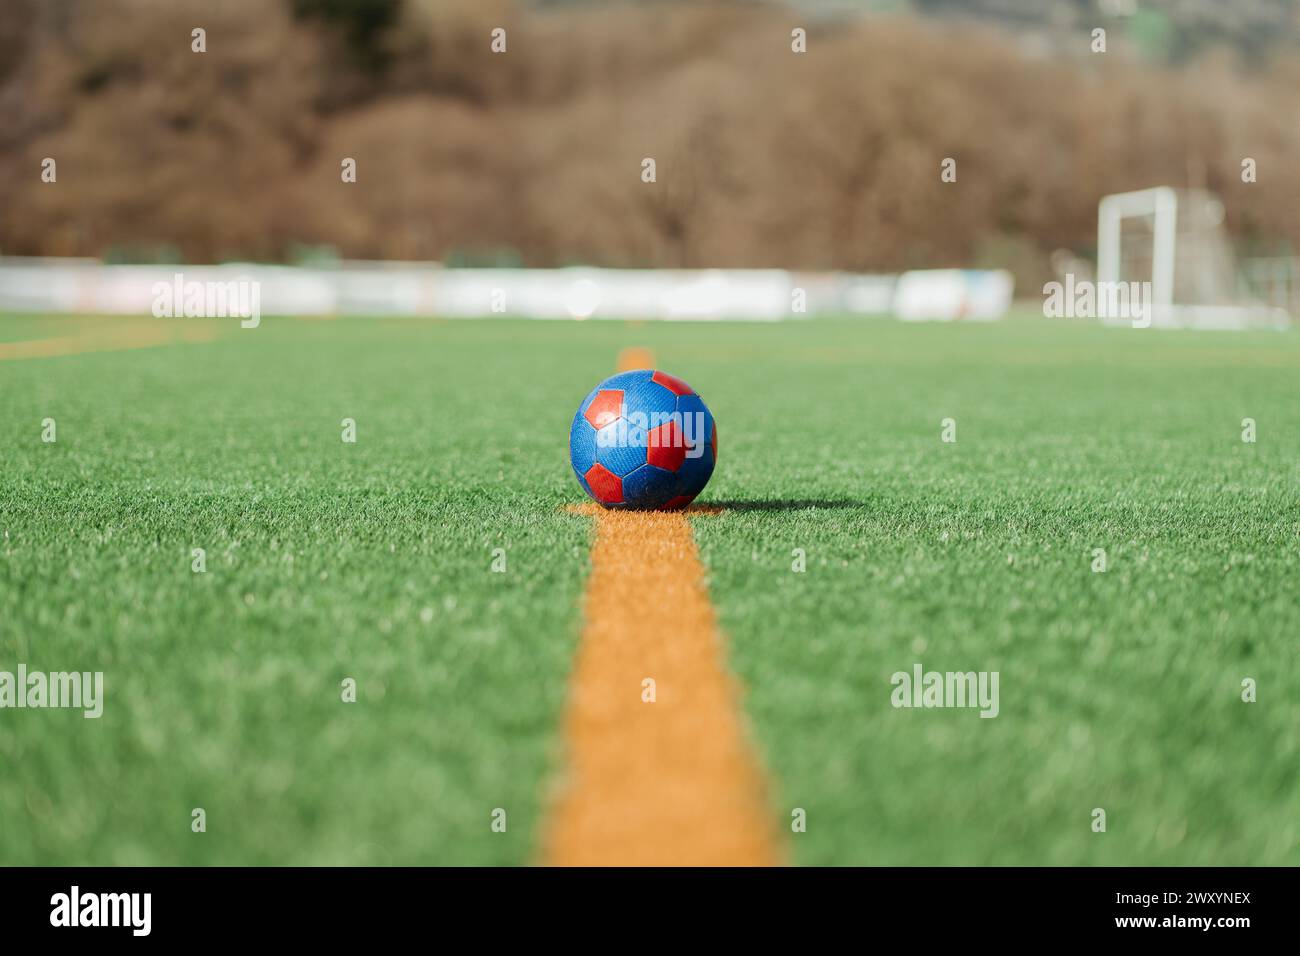 Close-up of a colorful soccer ball placed on the green grass of a soccer field, perfectly aligned with the midfield line, with goalposts visible in th Stock Photo